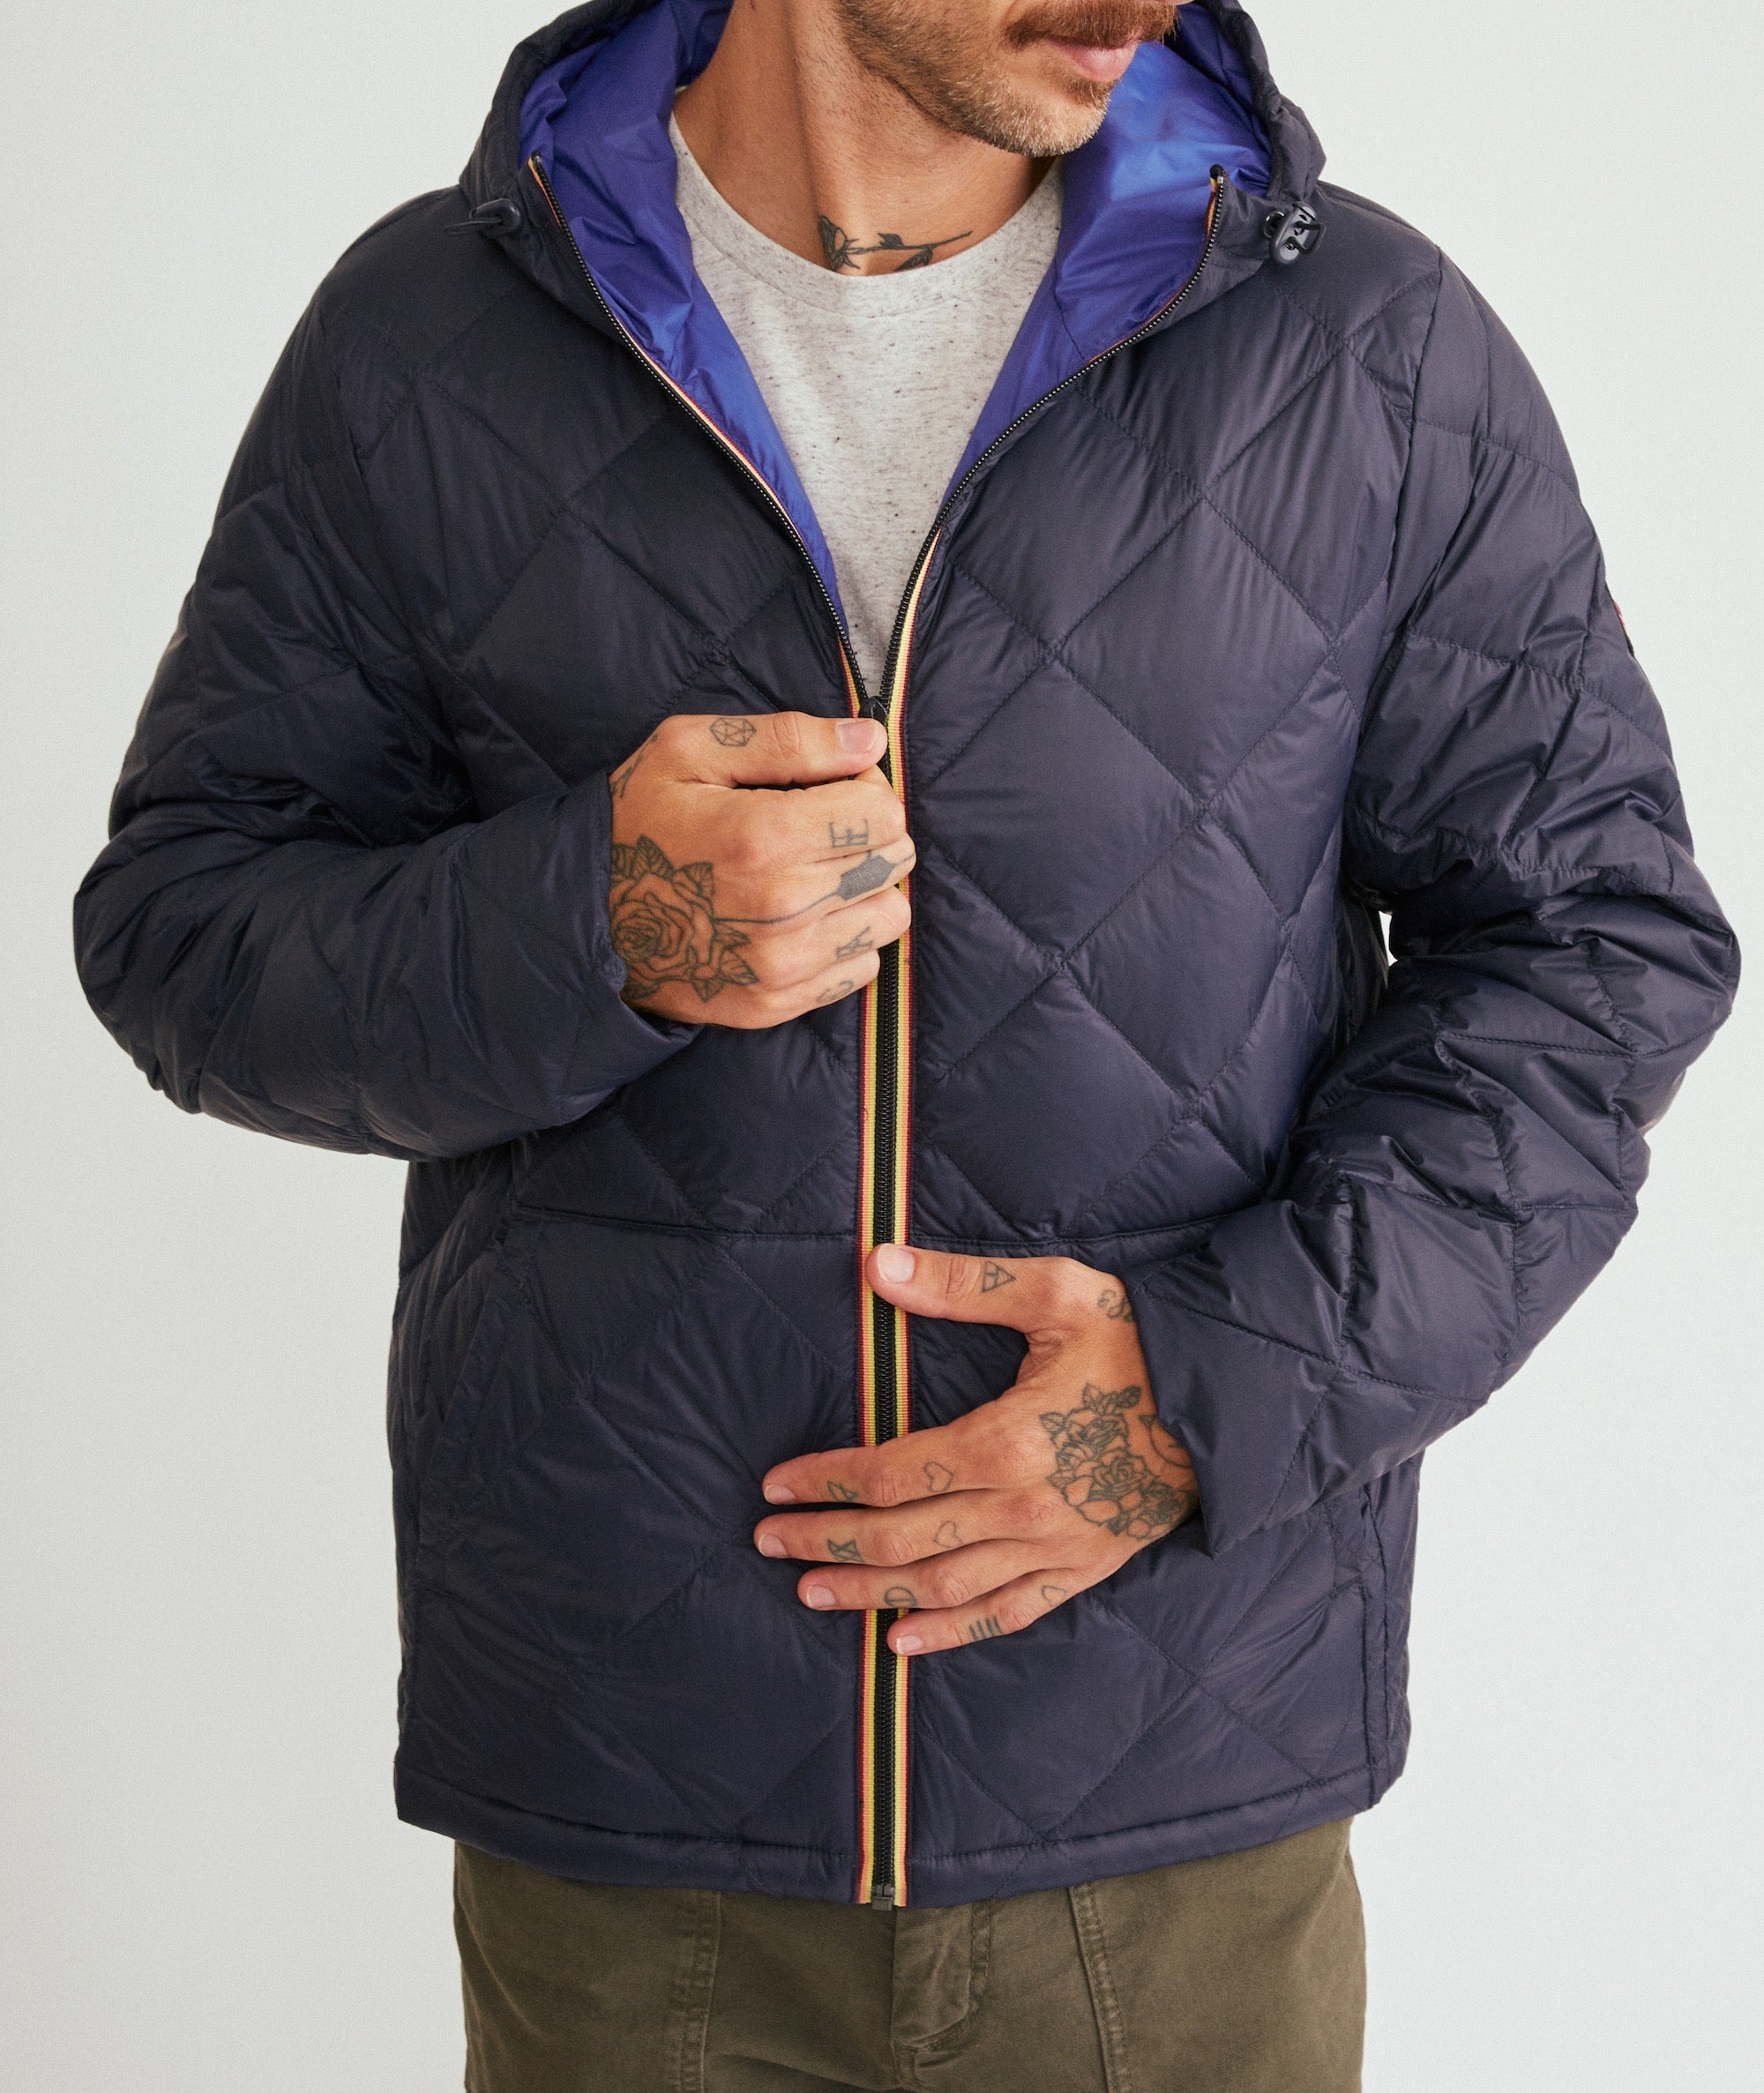 CAPTAINS HELM QUILTED WARM JKT キャプテンズヘルム 年中最低価格 